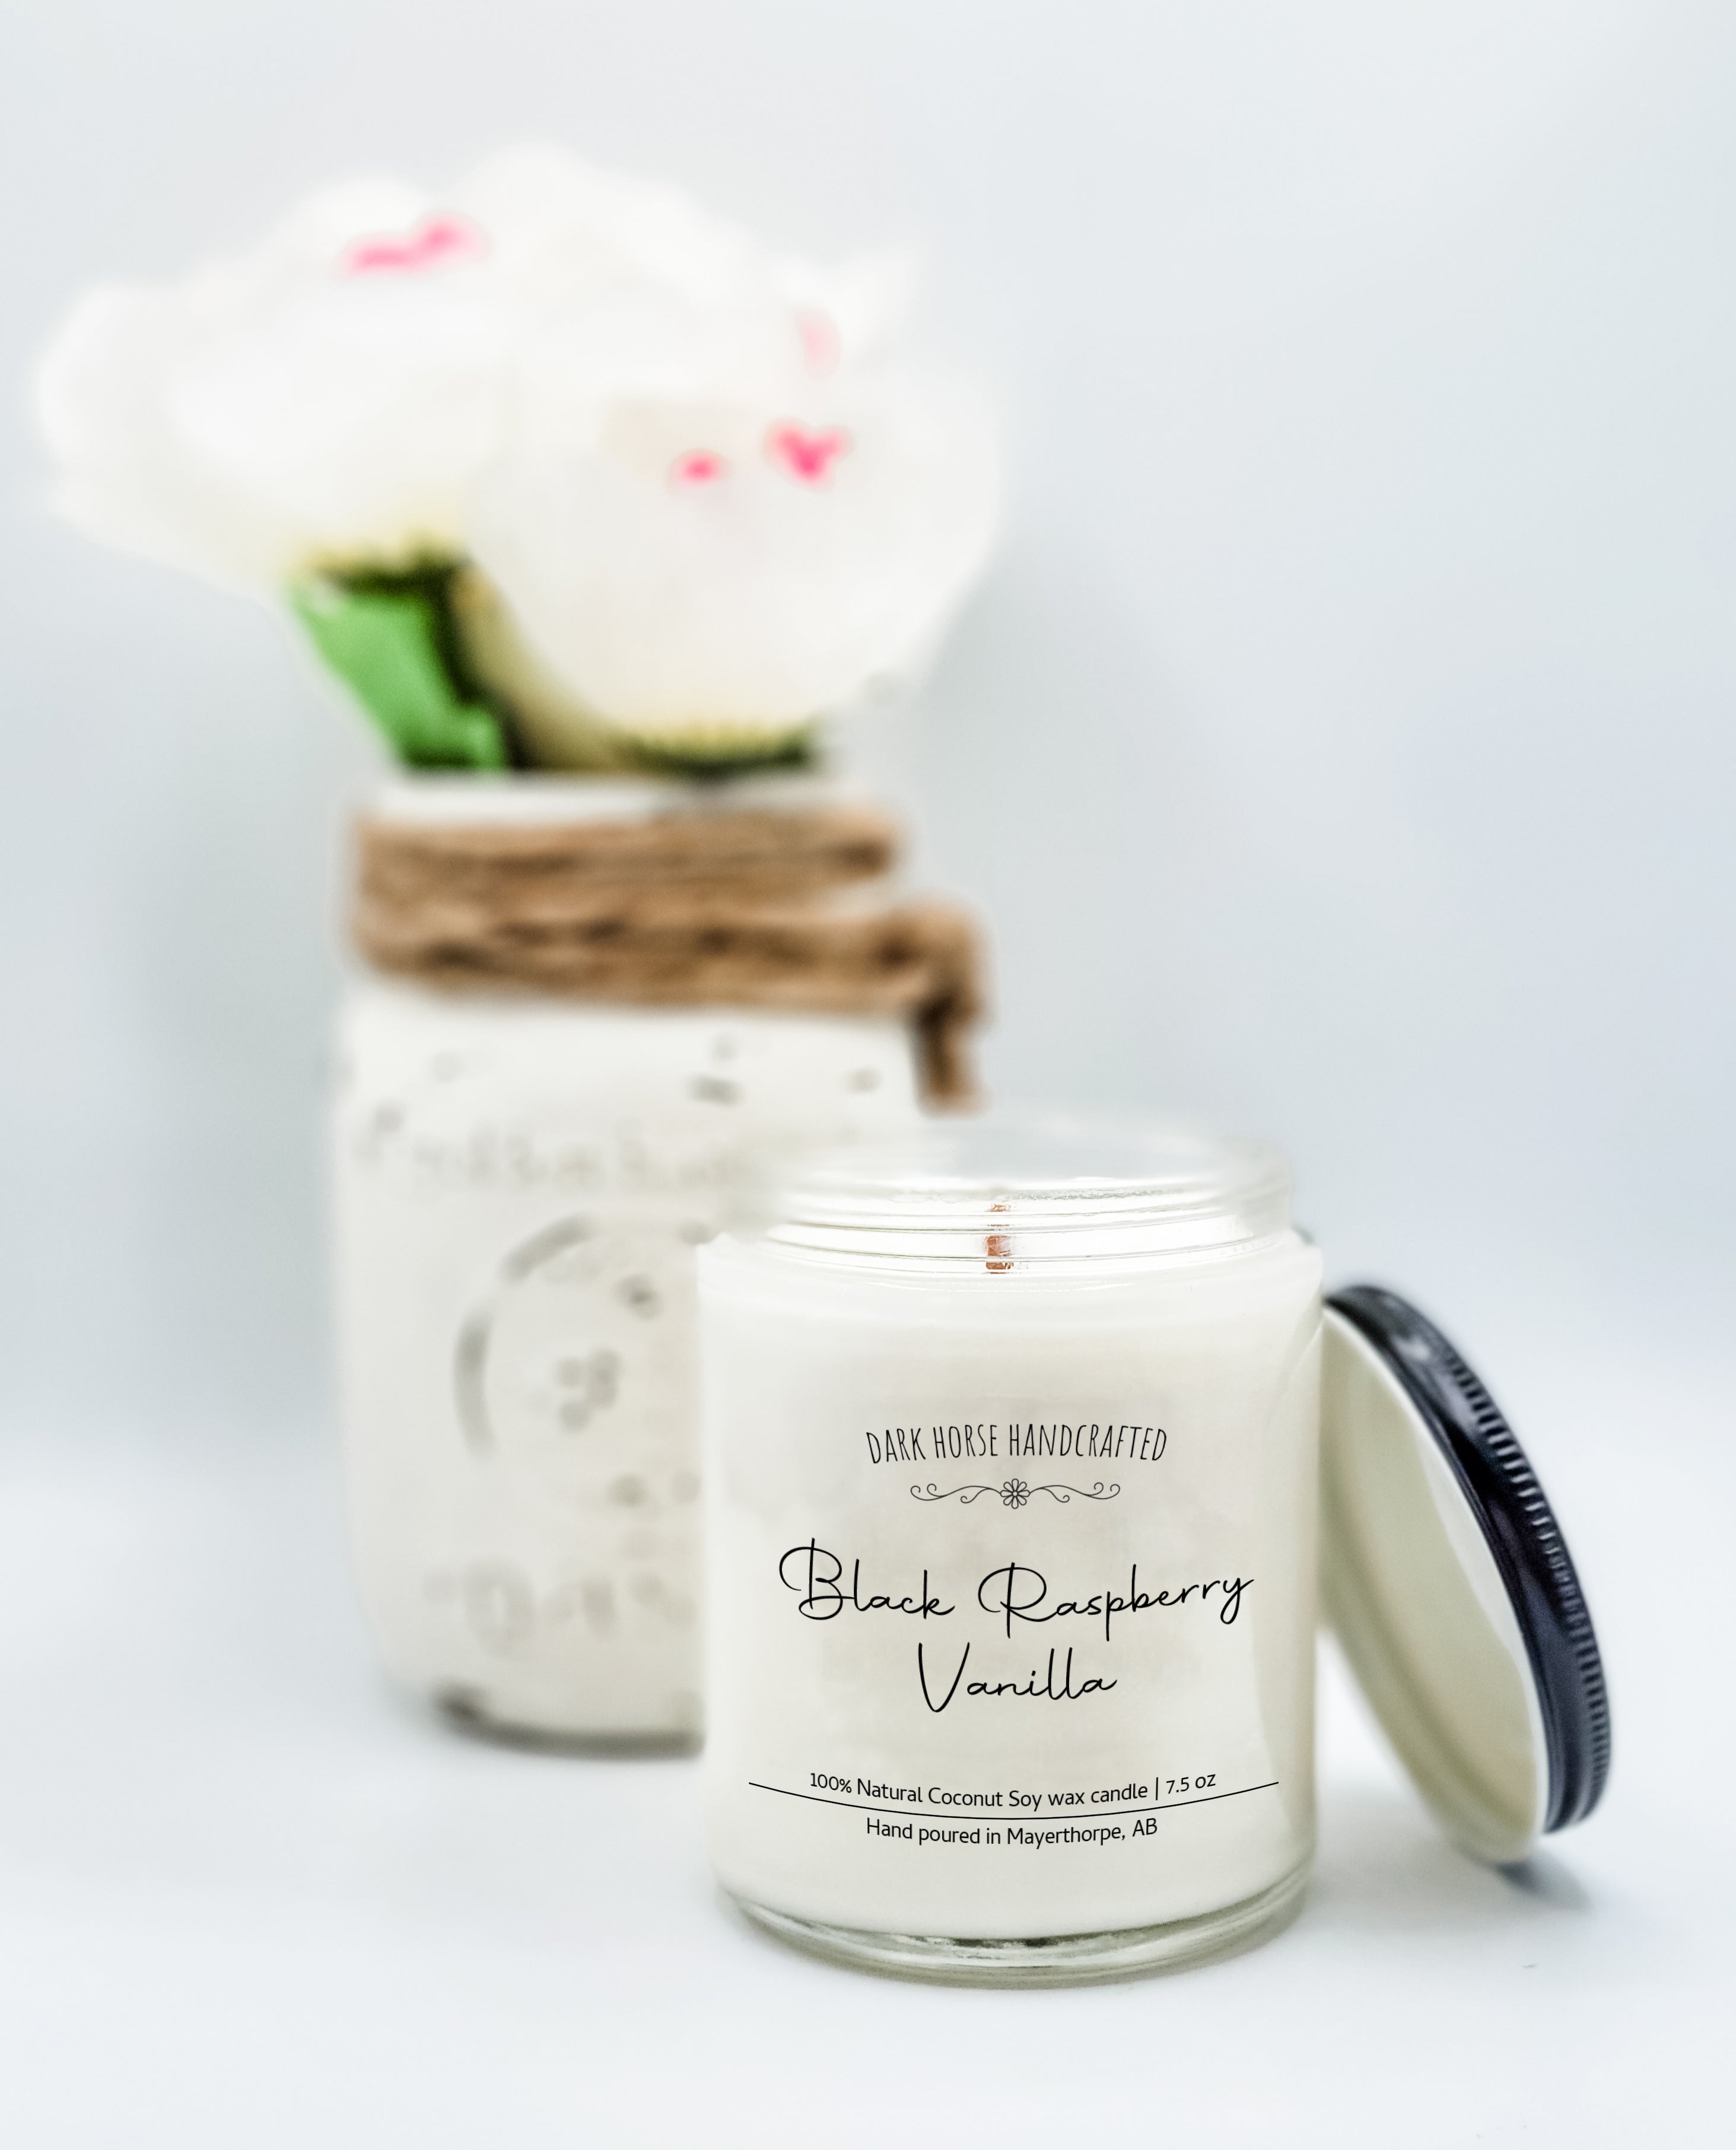 Black Soy 'Vanilla Forest' scented candle 220 ml. (Copy)